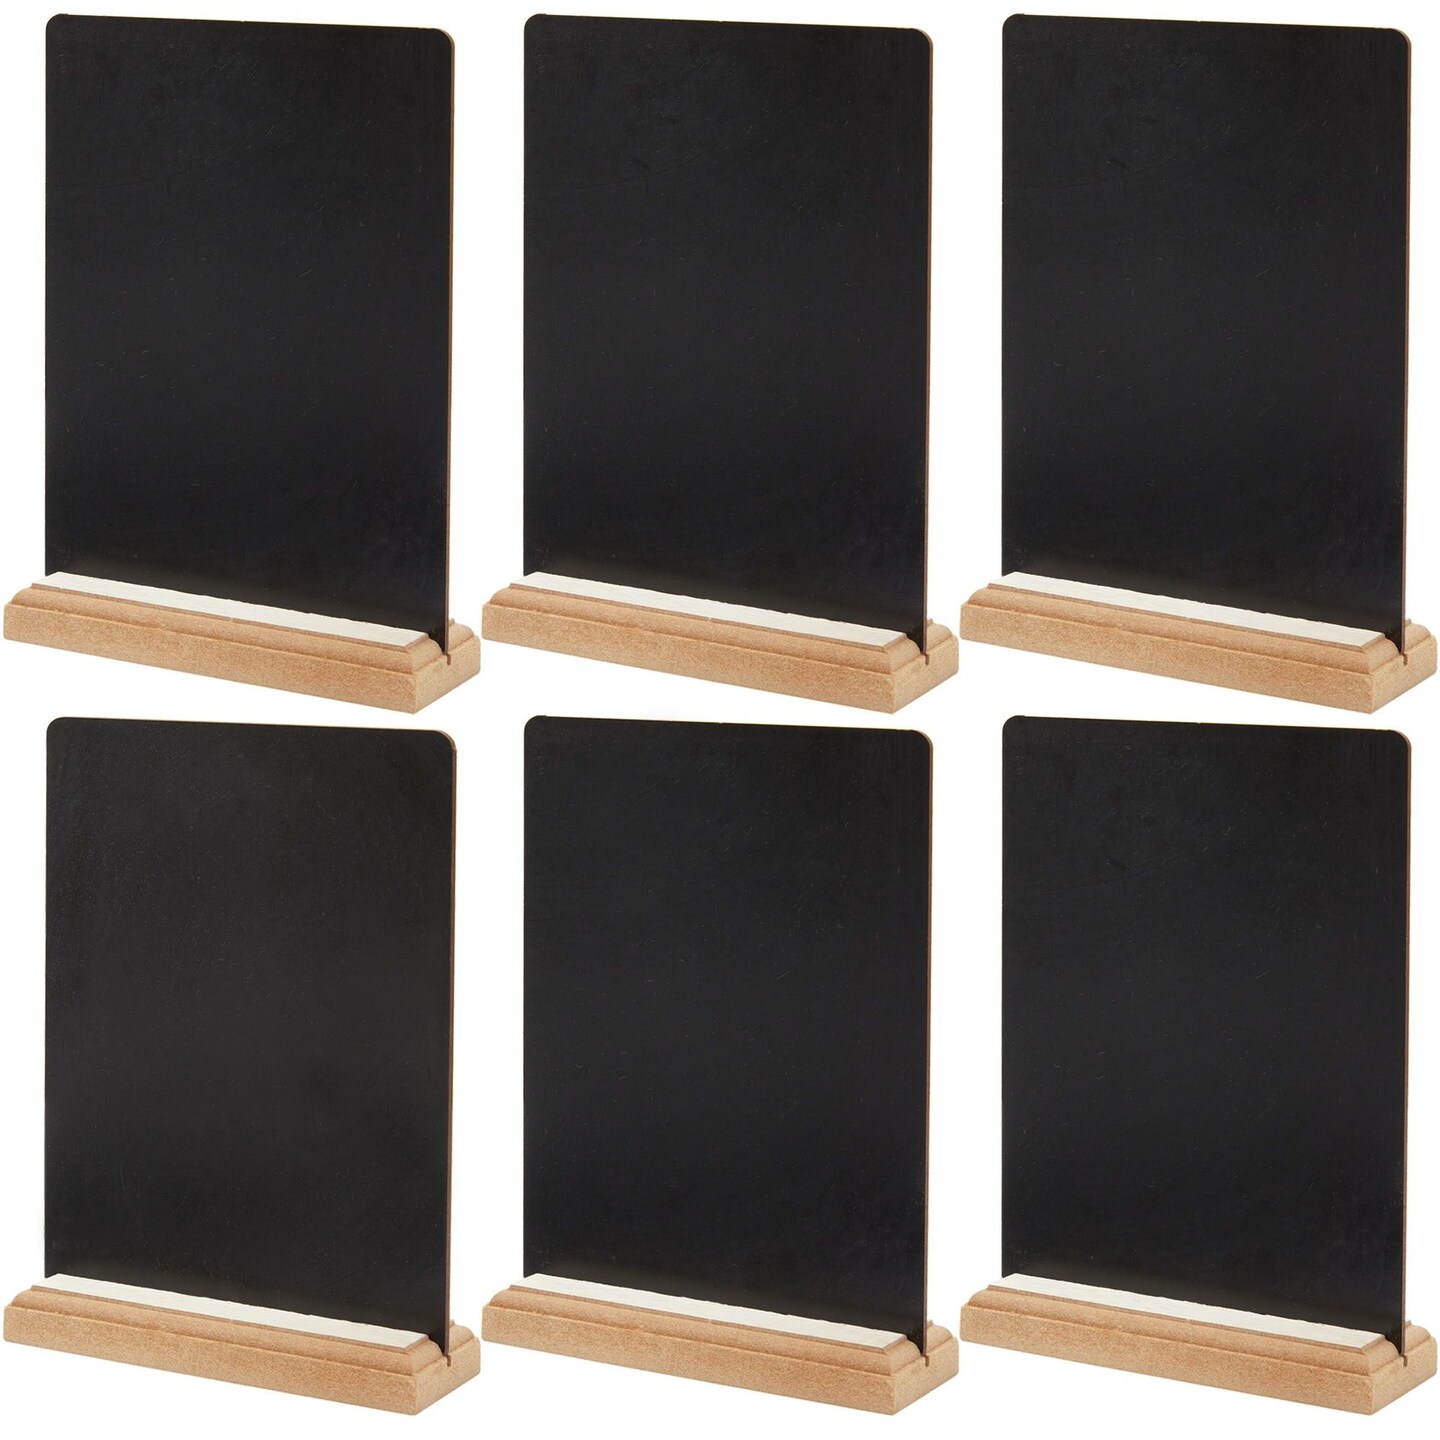 Mini Chalkboard Signs with Stand for Table Decorations, Food Signs, Message Boards, 6 x 8 In (6 Pack)